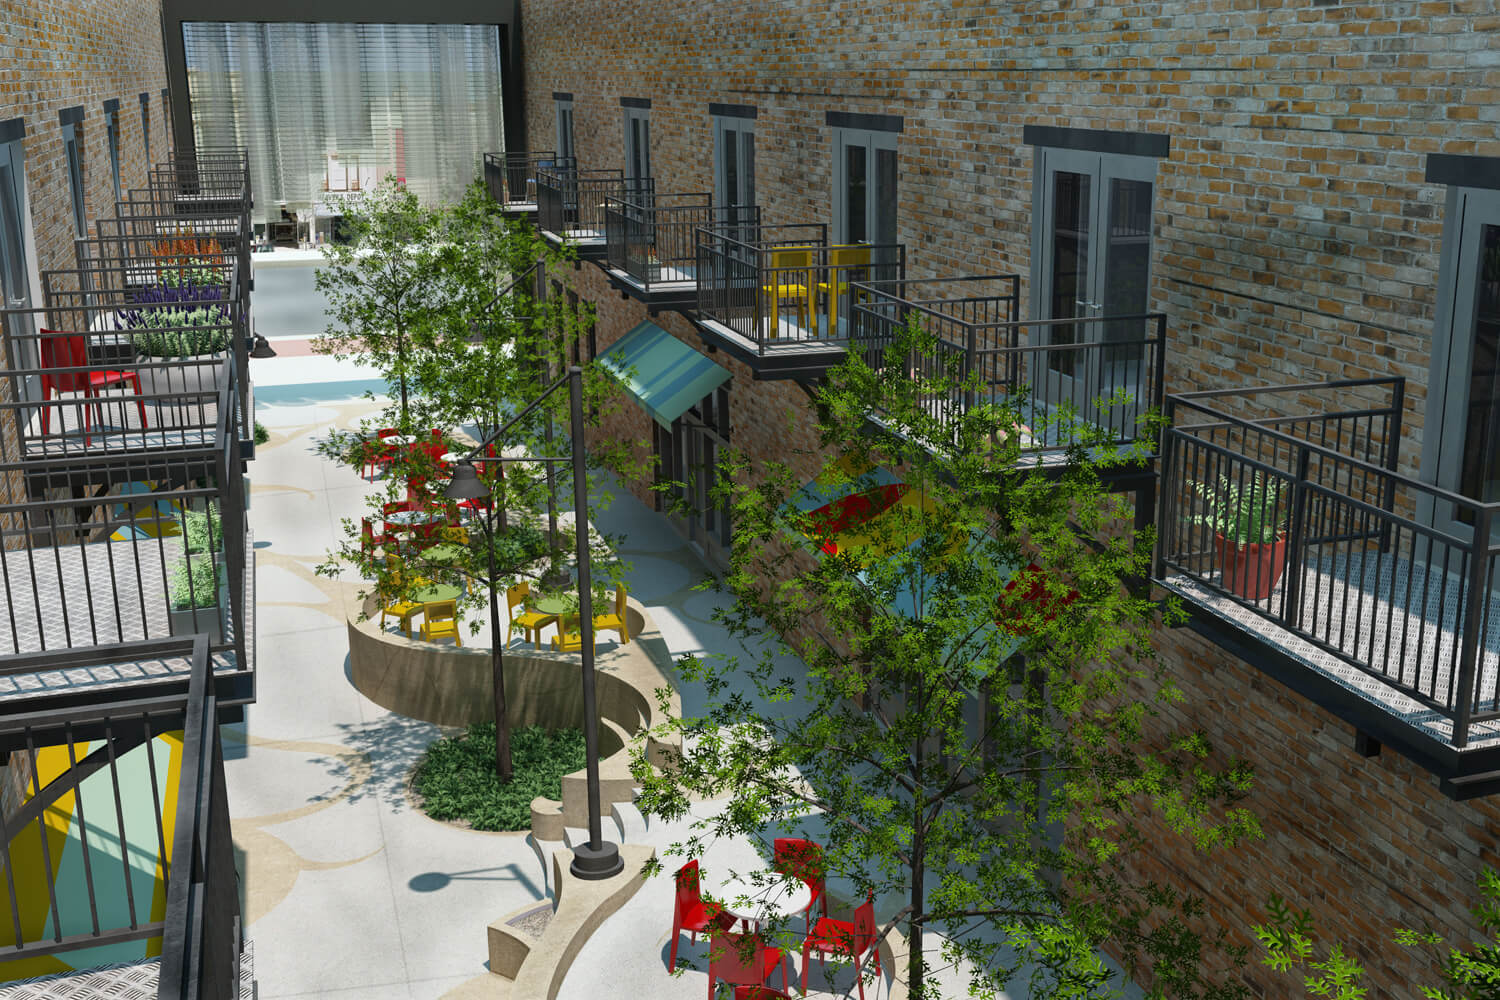 Dexter Alley Park Designed by Foshee Architecture - Exterior Aerial View